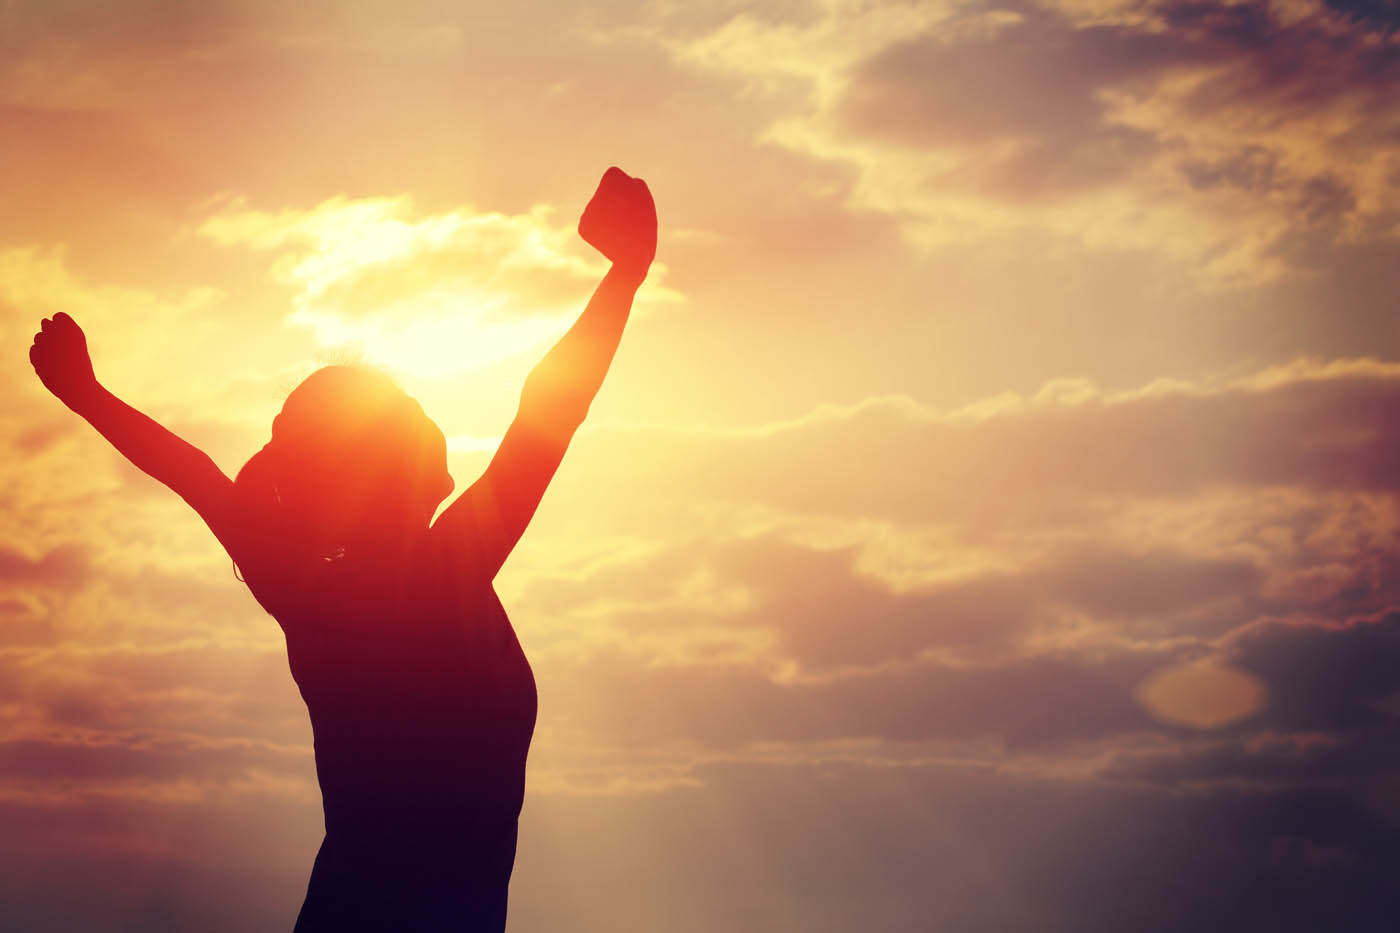 A woman standing in the light with her arms up in the air - learn how you can get relief with Light Lounge's back pain management in Denver, CO.